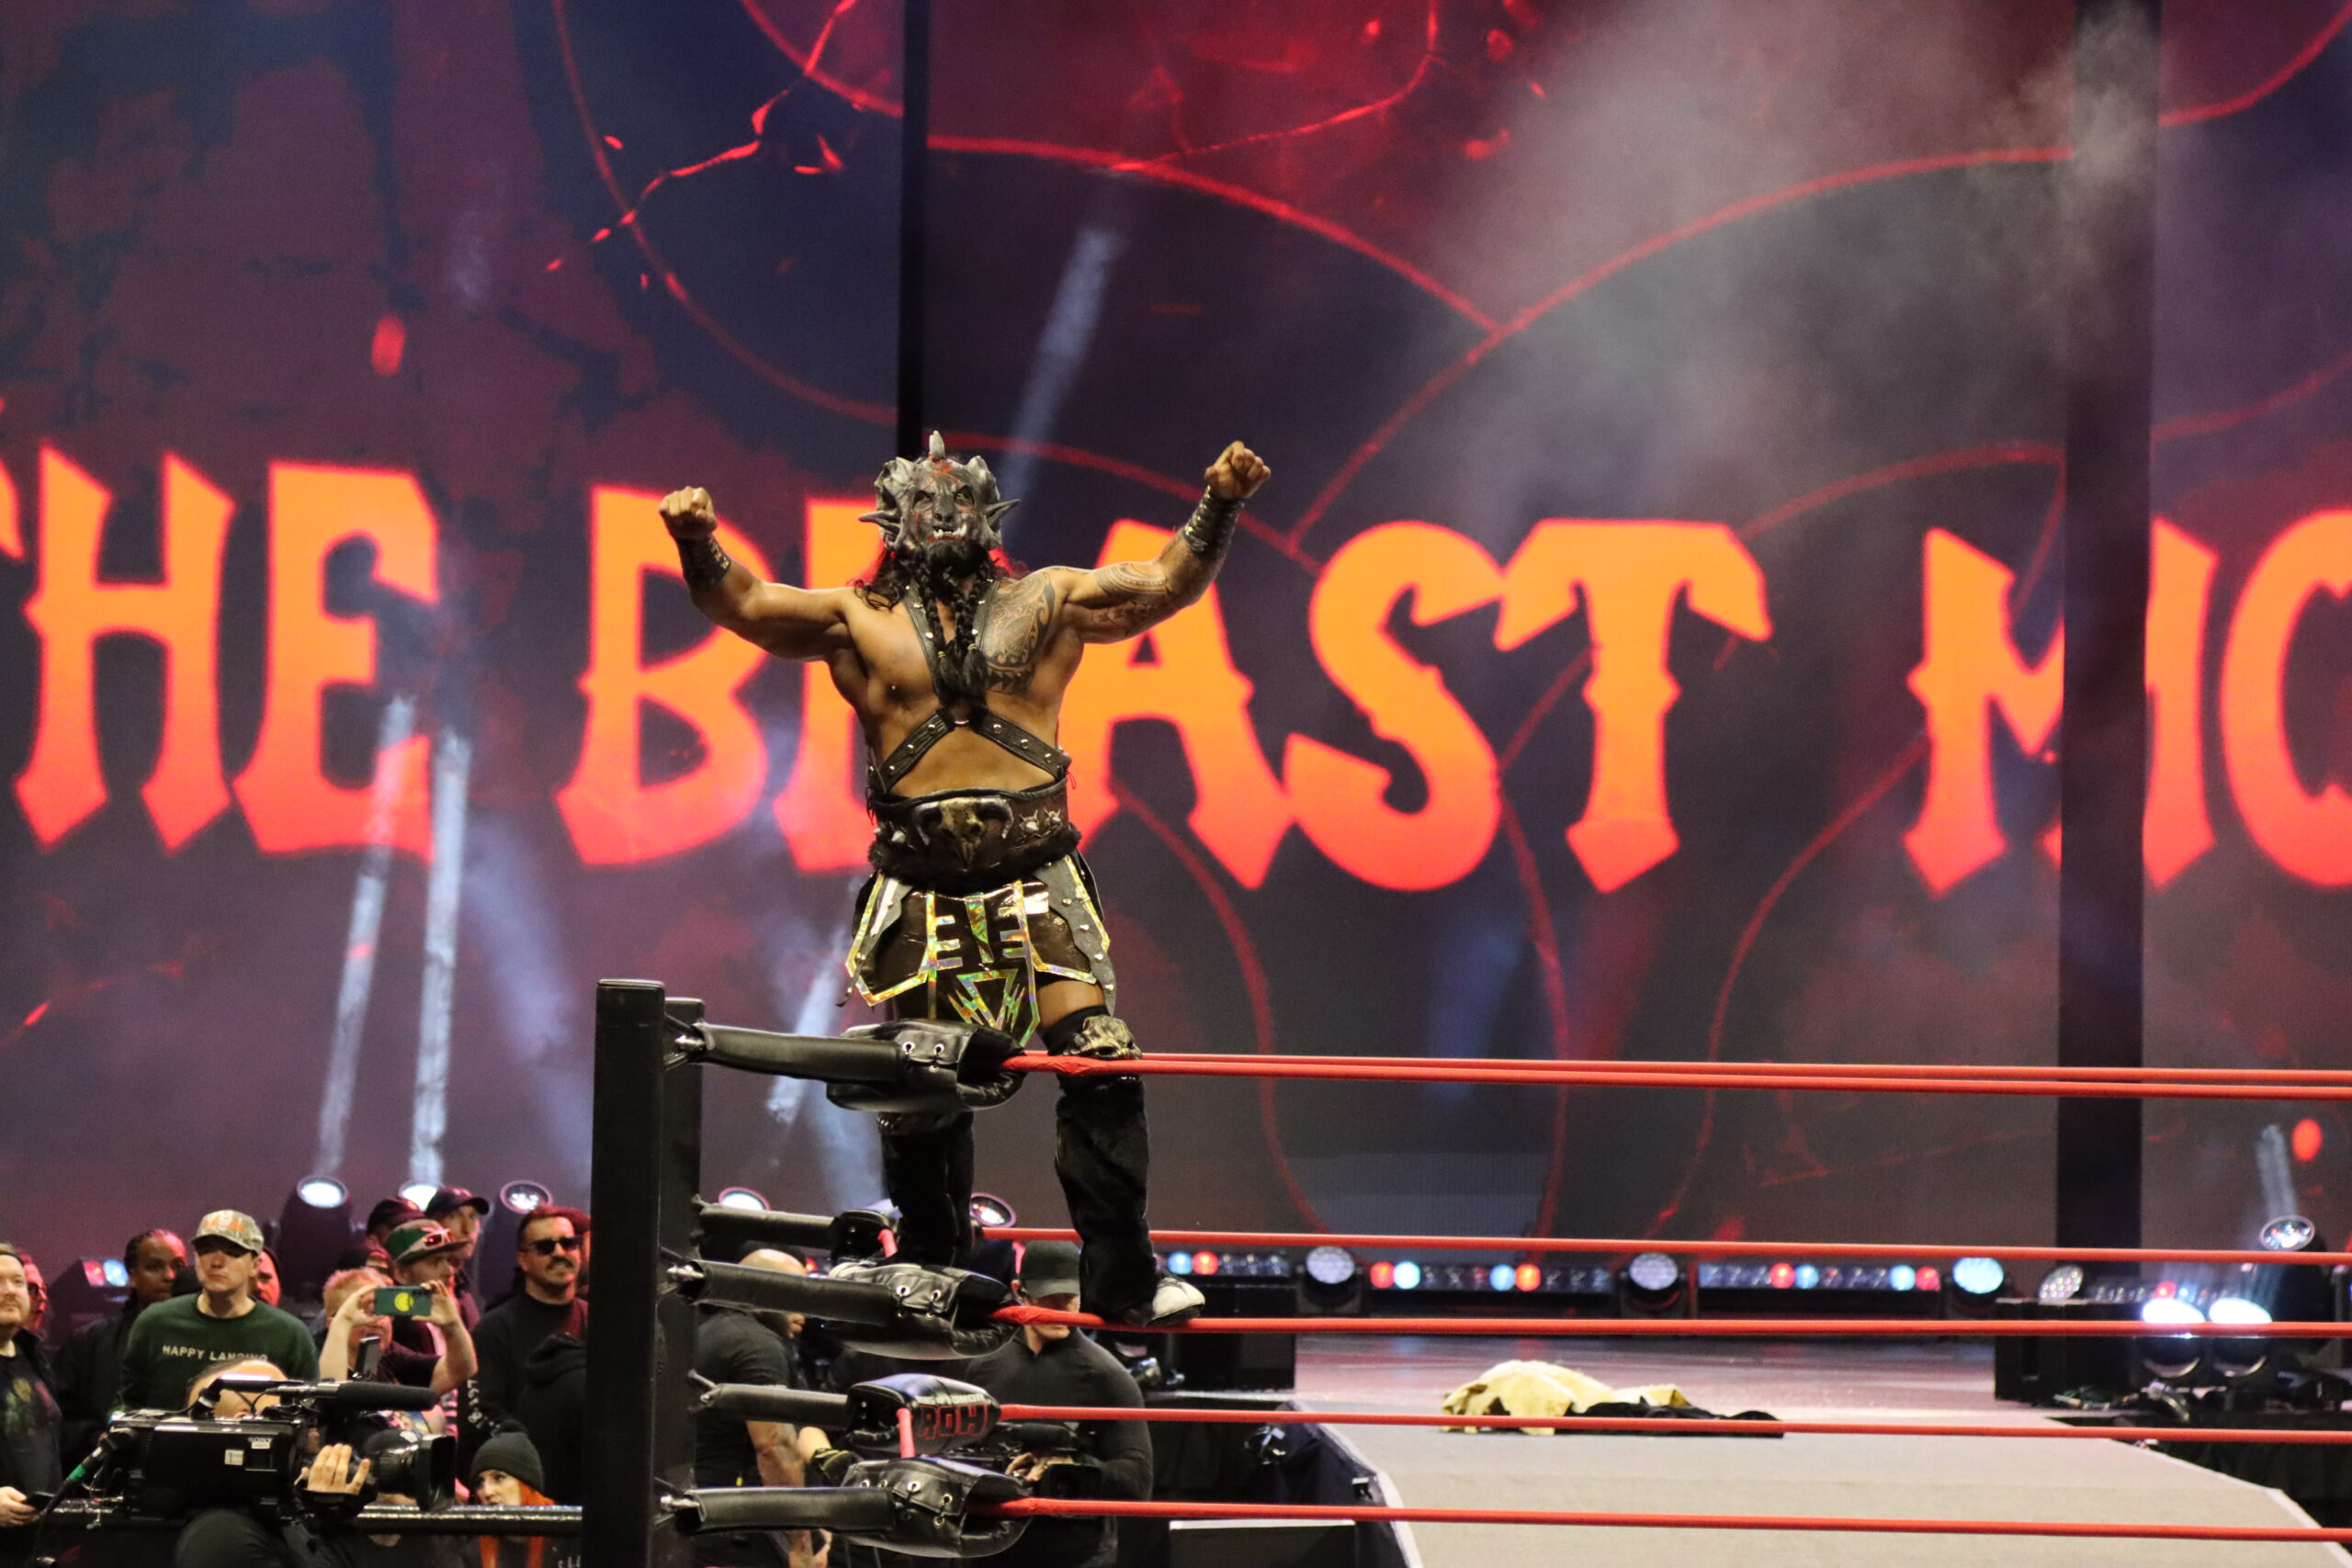 The Beast Mortos' entrance at the The Liacouras Center in Philadelphia, Pennsylvania, on April 5, 2024. Photo by Dax J. Martin-Cheeves